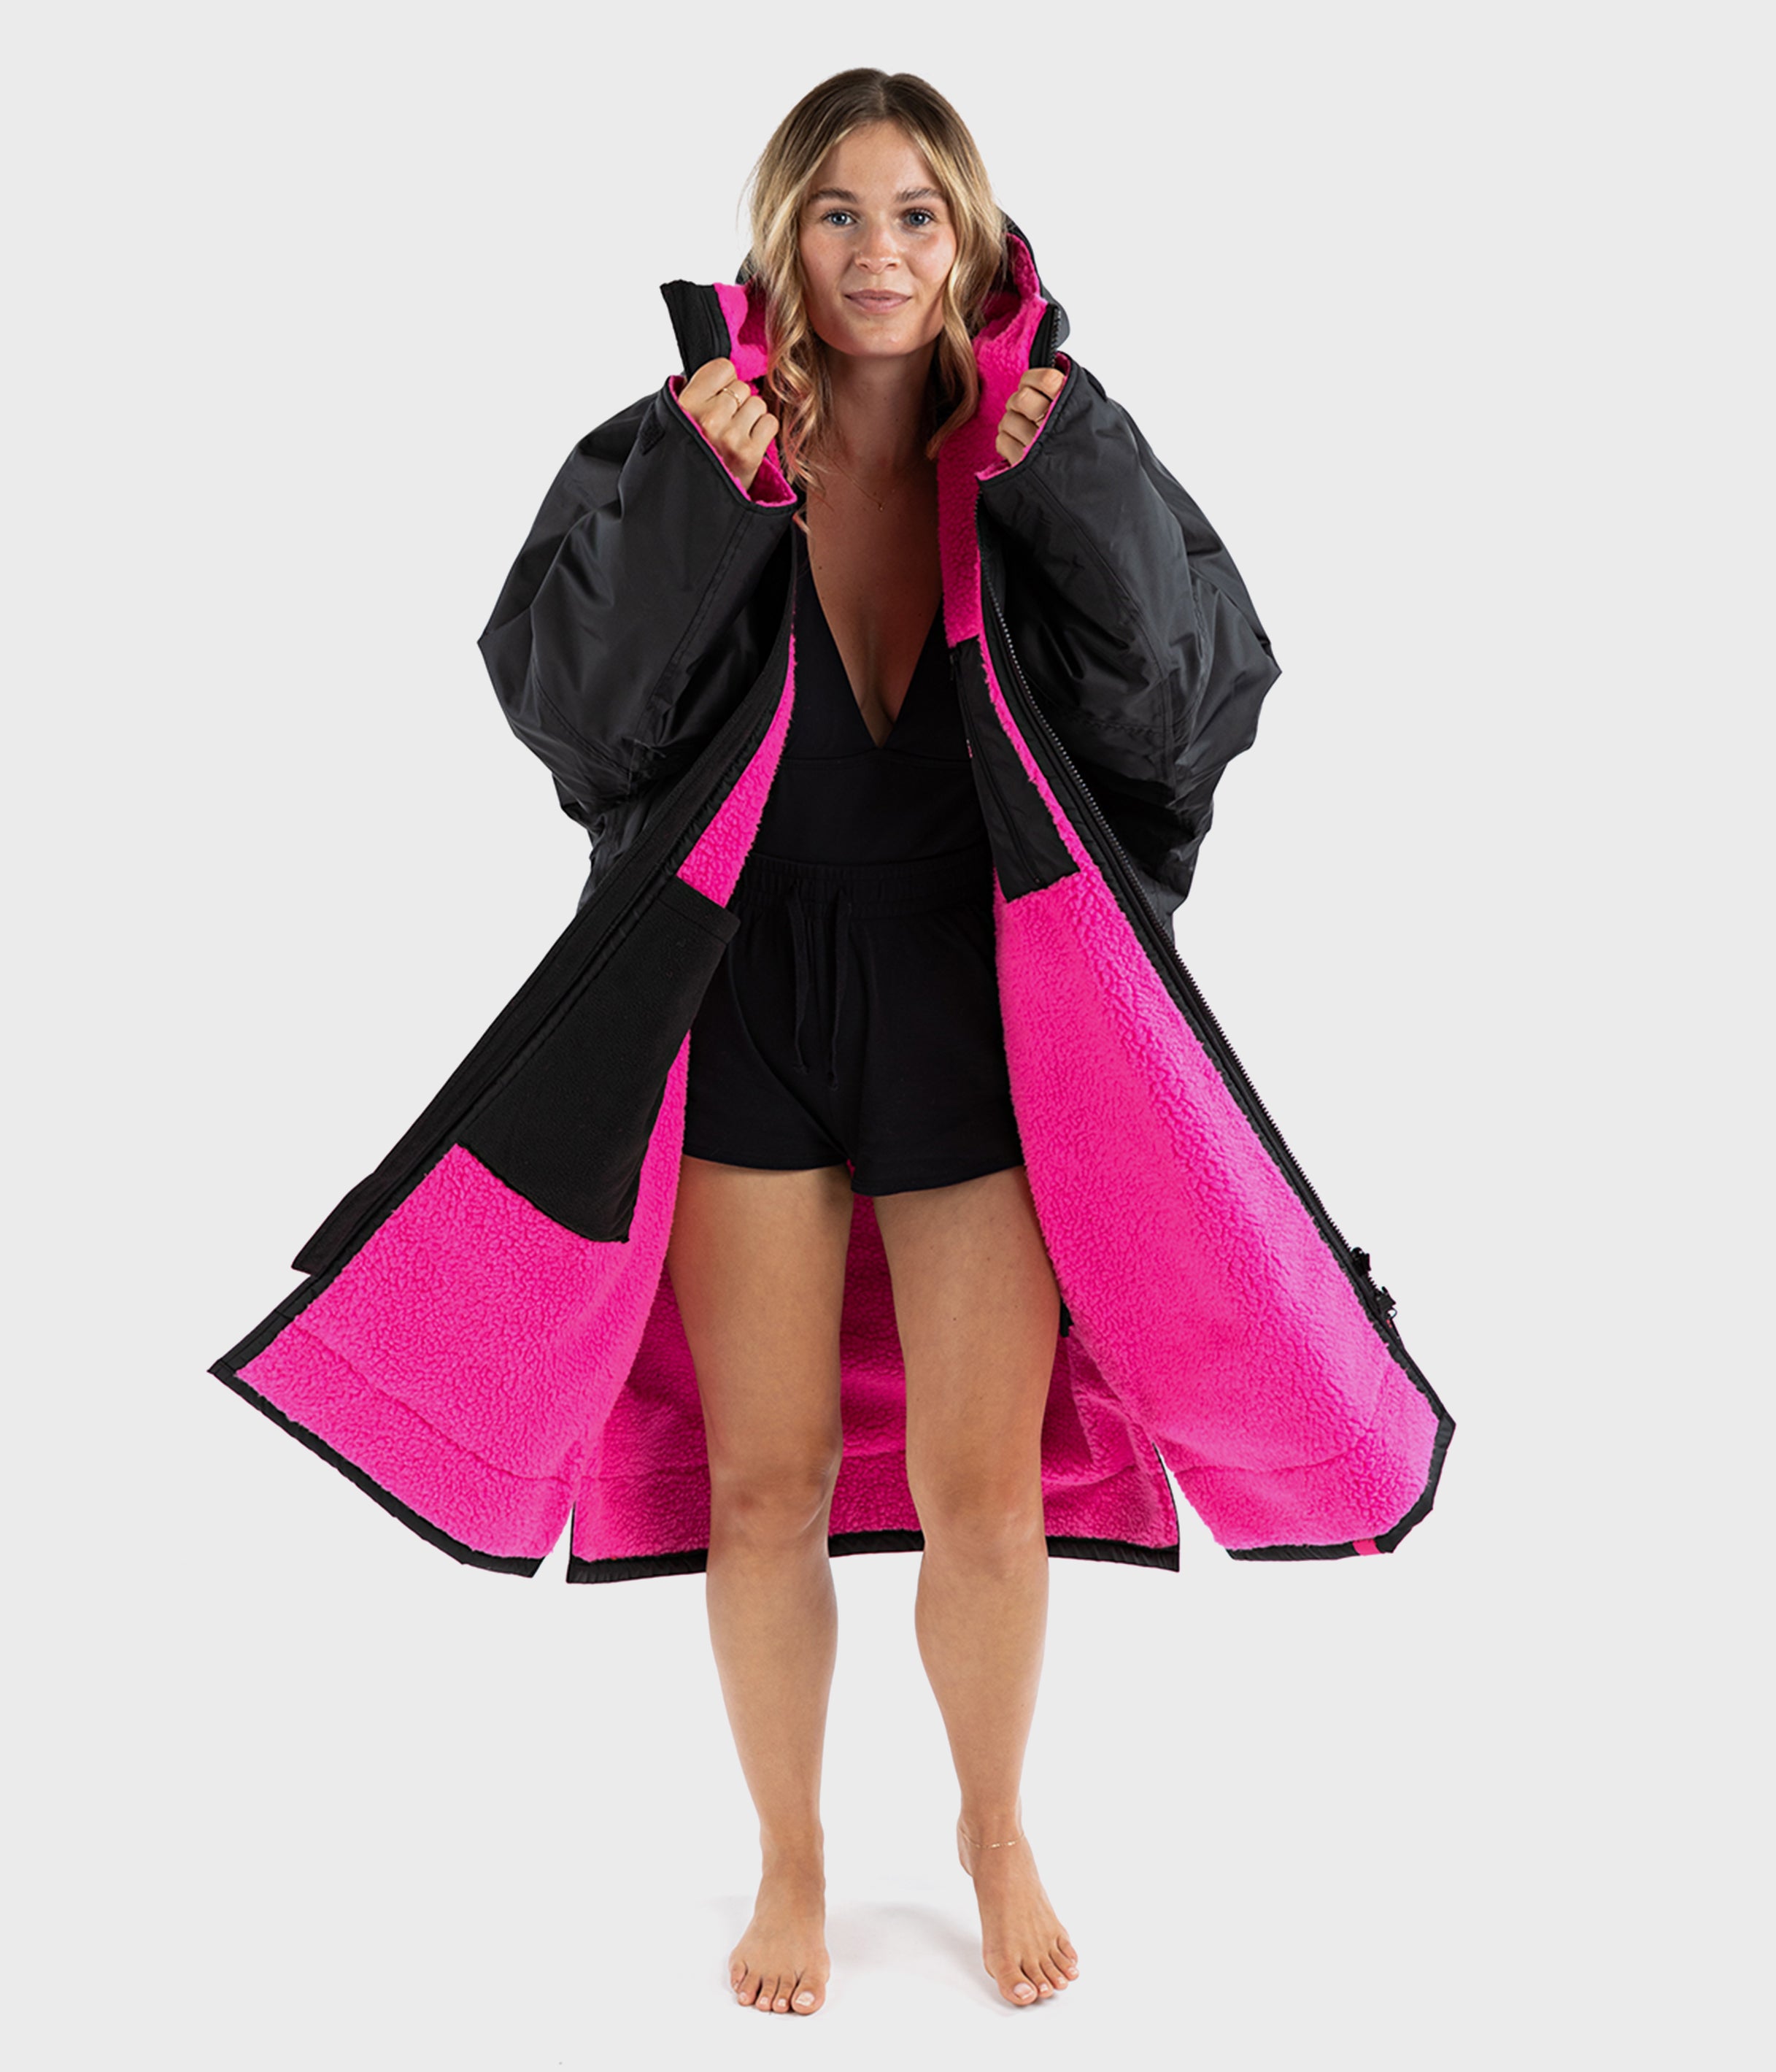 dryrobe Advance Long Sleeve | Black/Pink modelled showing cosy pink lining